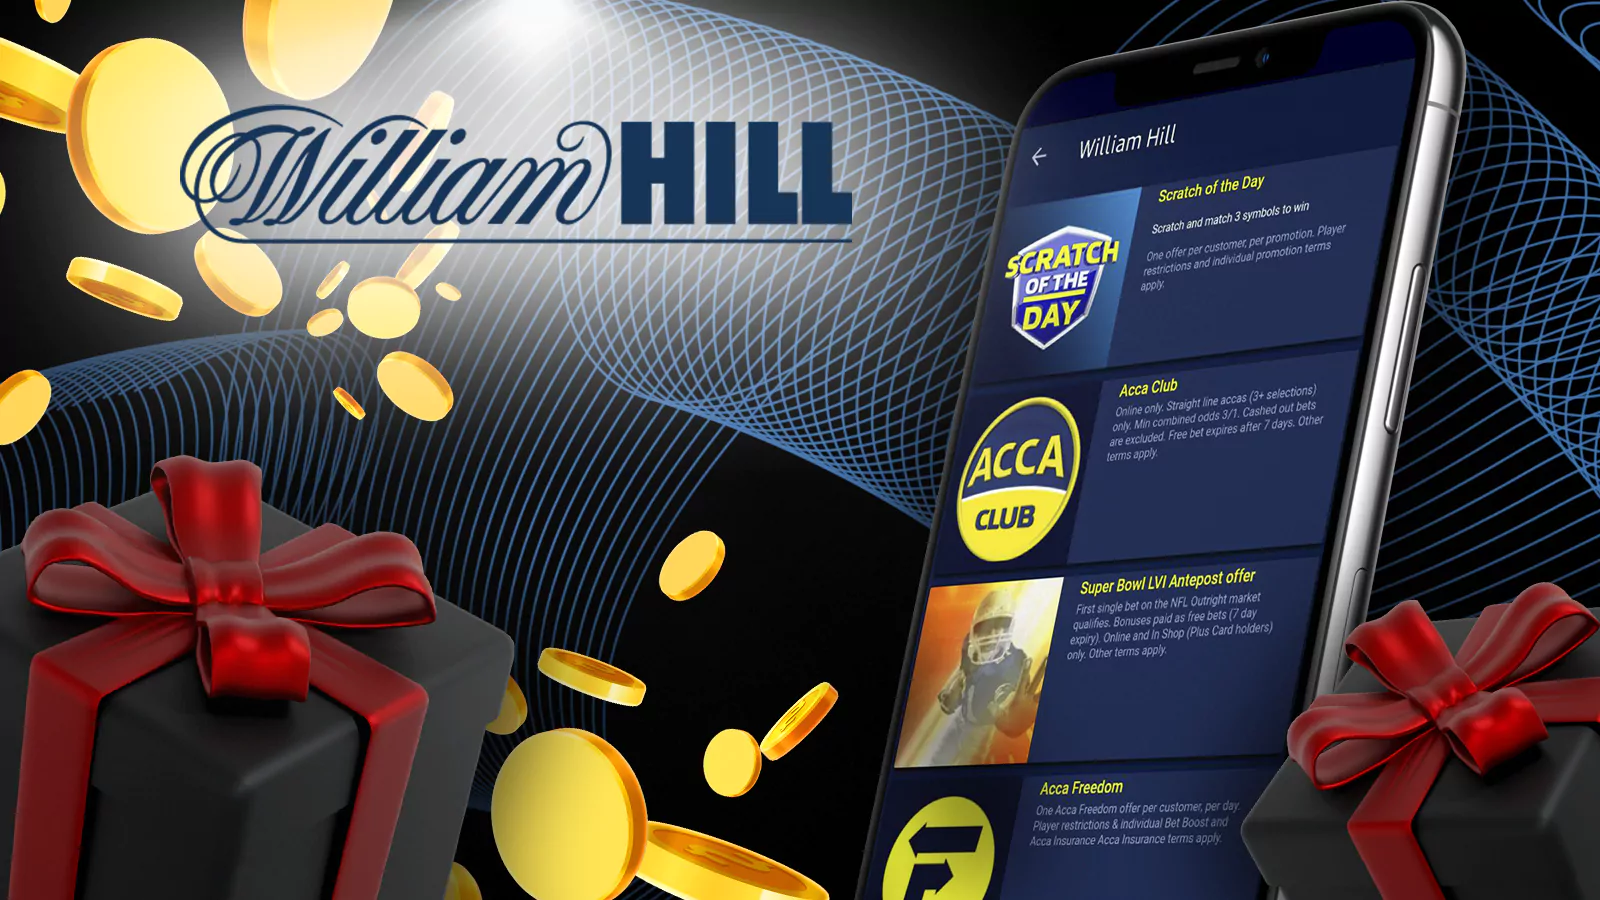 William Hill allows to get +100% and up to 1,000 indian rupess for its clients in first deposit.